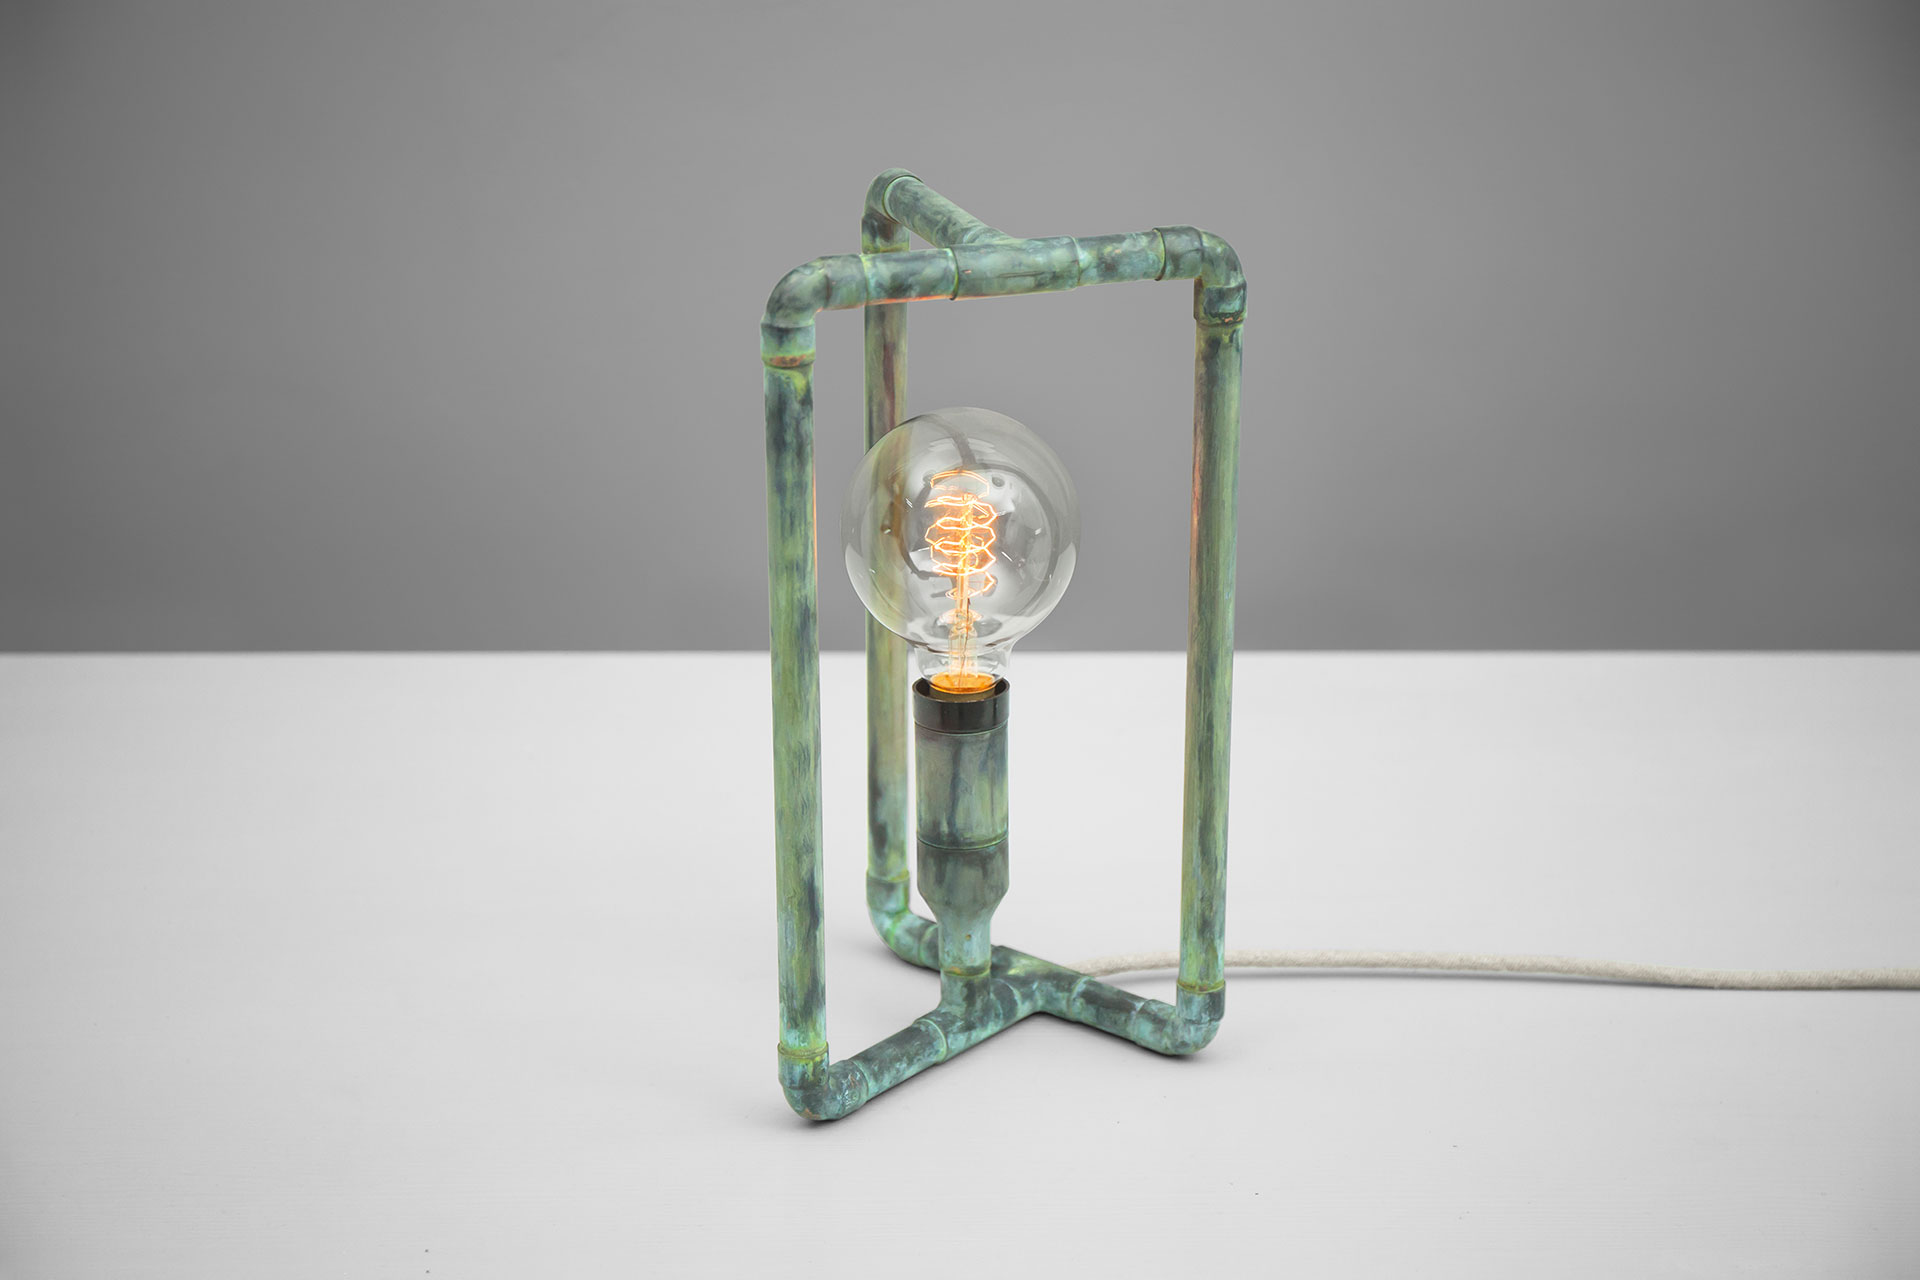 Conceptual design table lamp in handmade green patina metal finish with creative touch dimmer and retro bulb